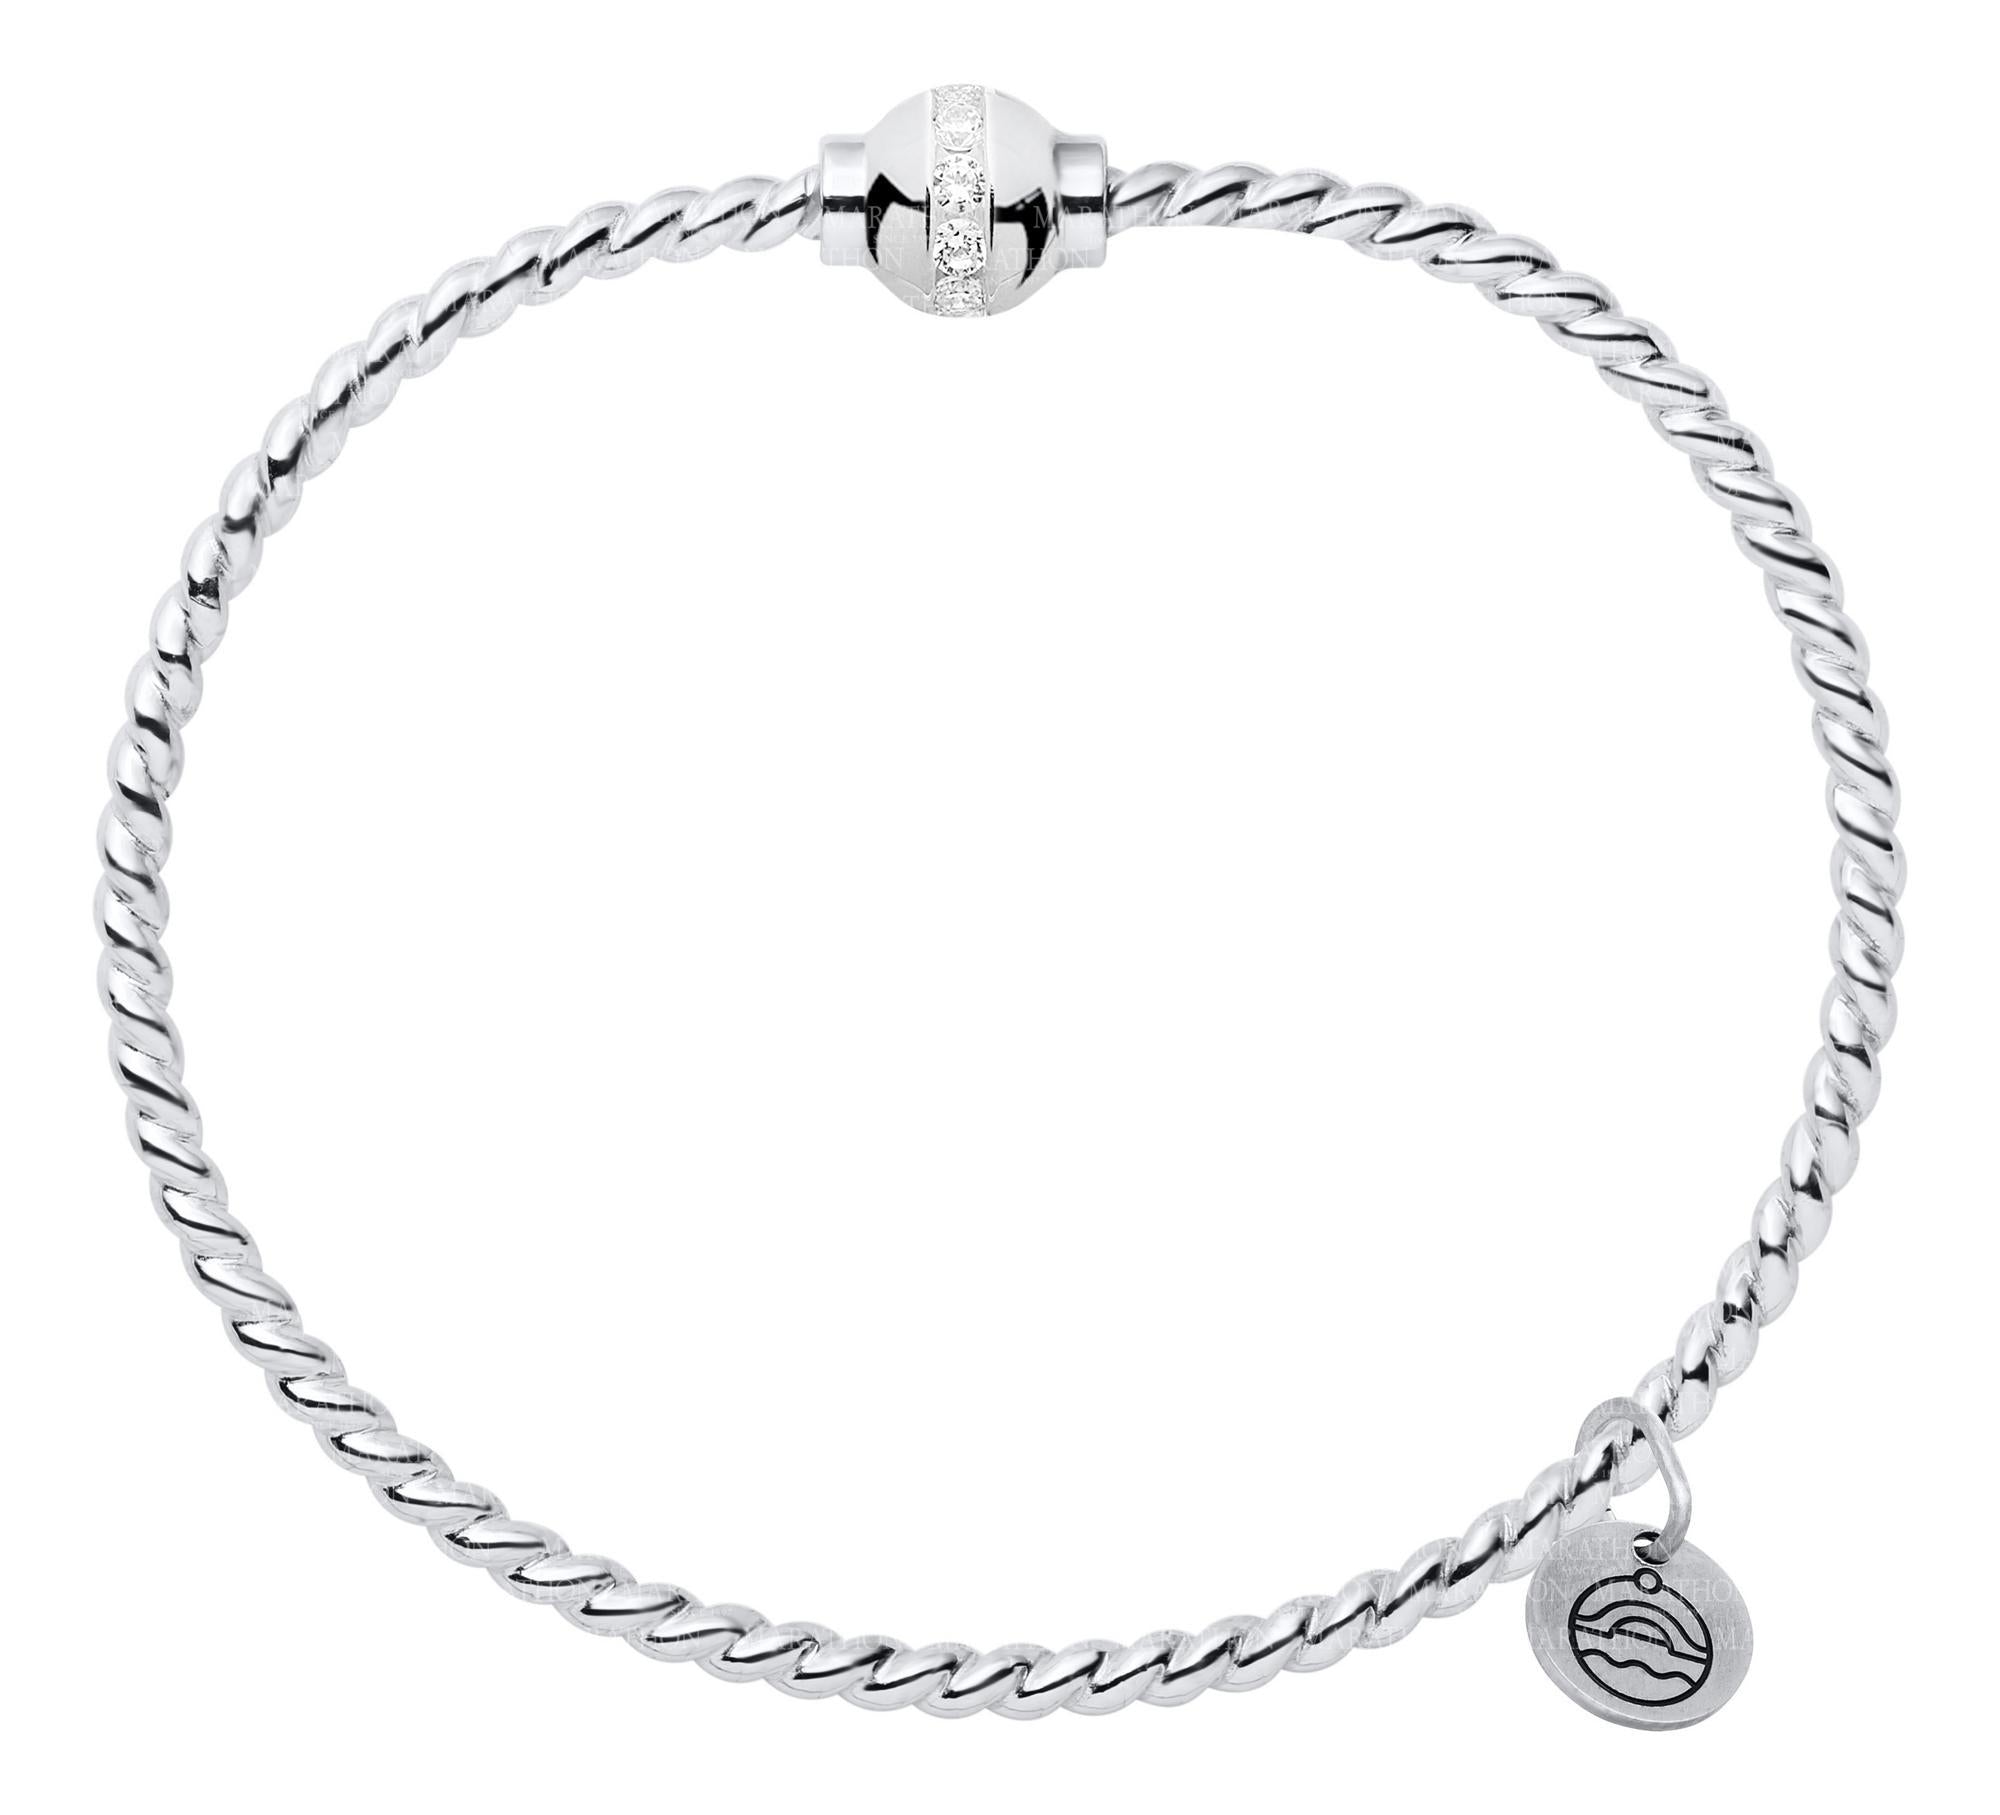 Genuine Sterling Silver Cape Cod Twist Bracelet with Polished Sterling and CZ Bead